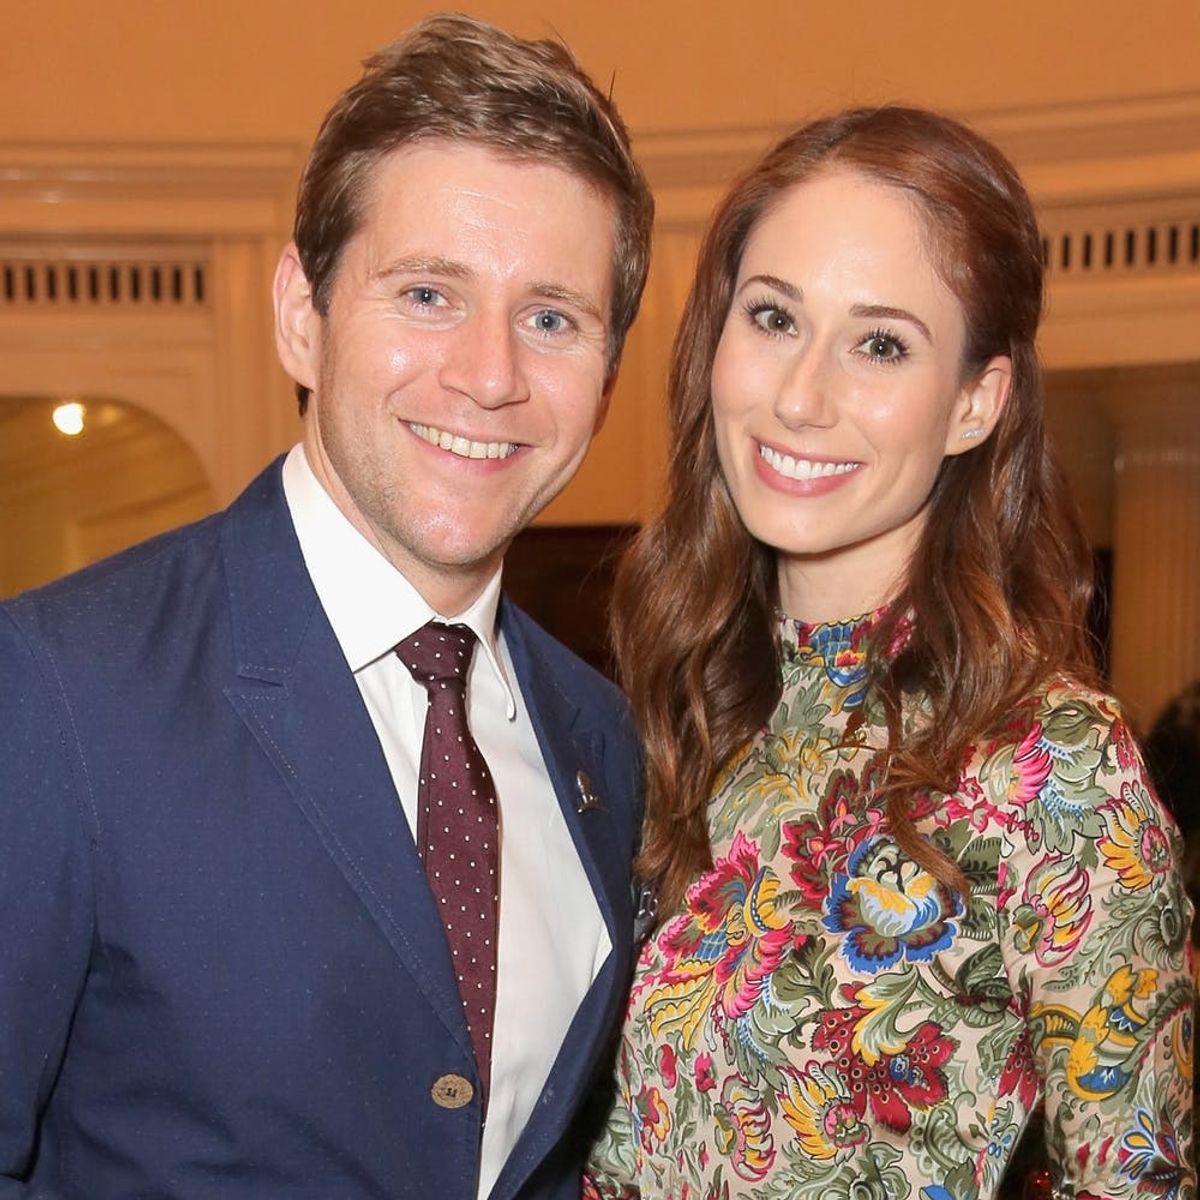 ‘Downton Abbey’ Star Allen Leech Is Engaged to Actress Jessica Blair Herman